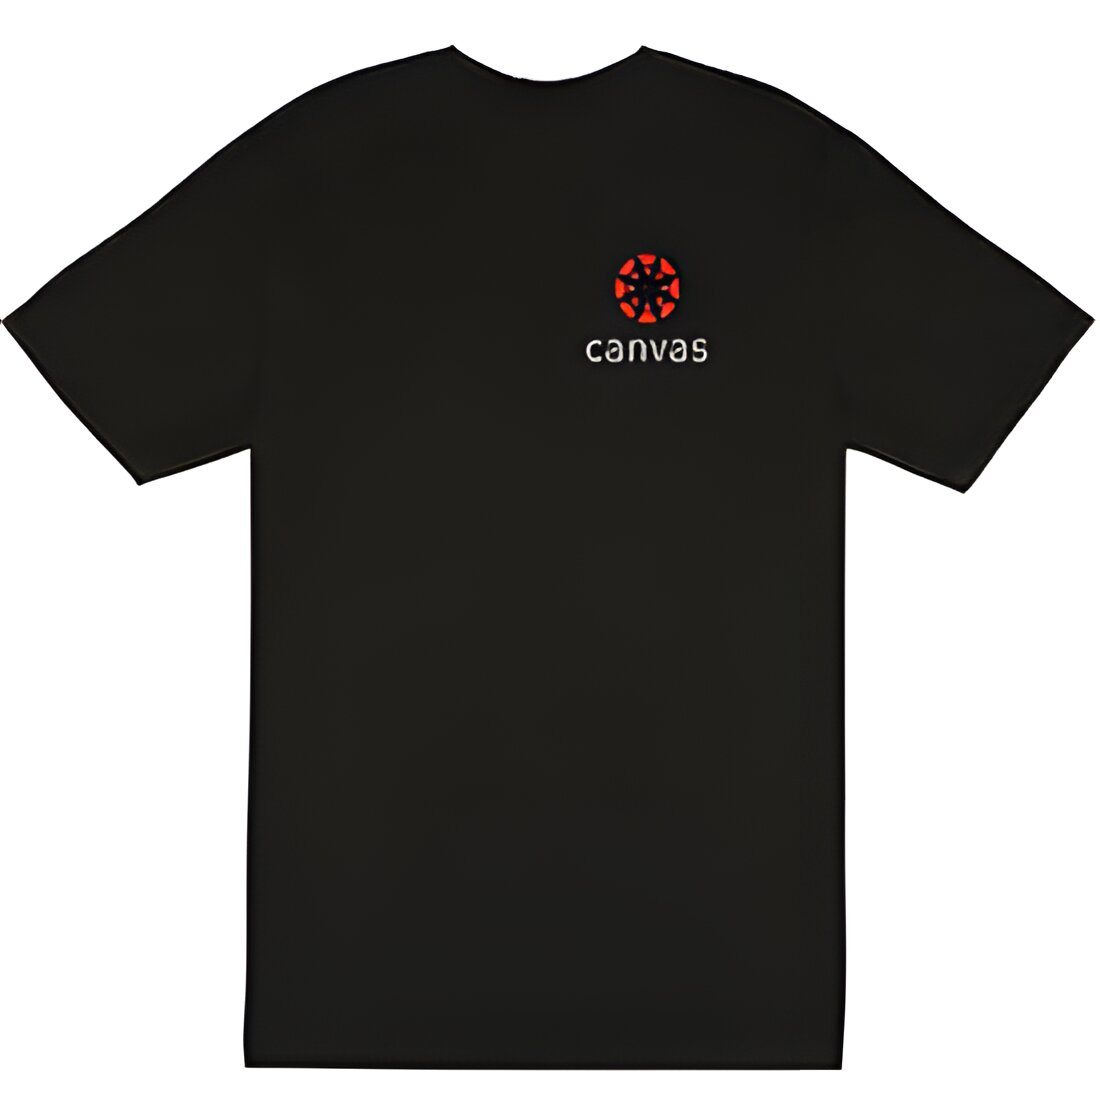 Free Instructure Canvas T-Shirt